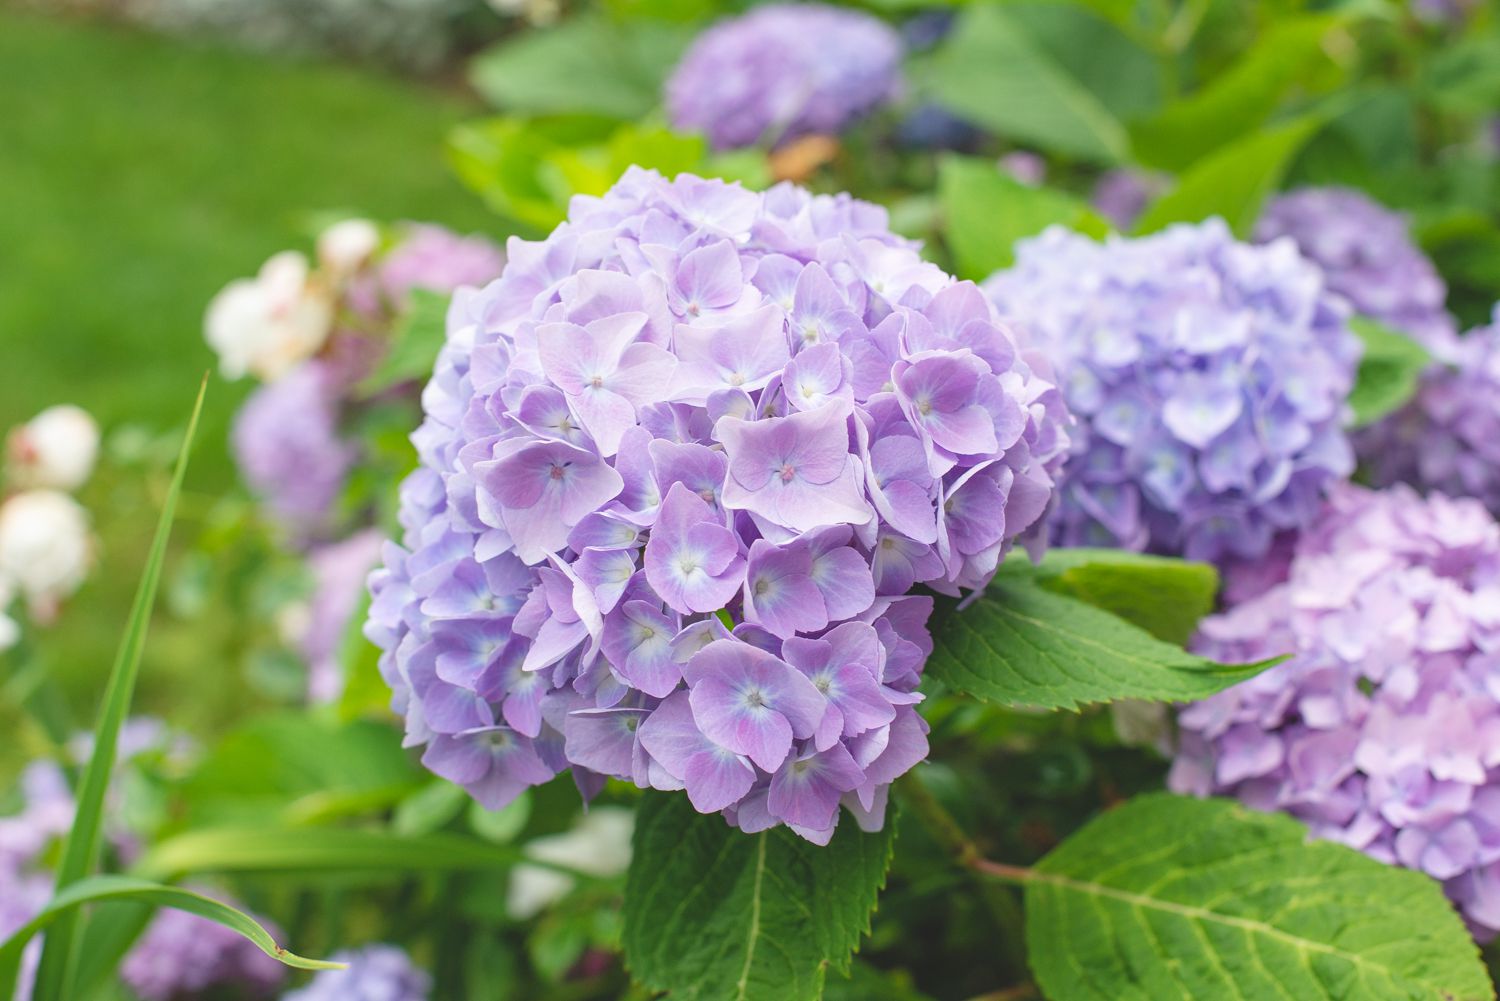 How to Grow and Care for Hydrangeas